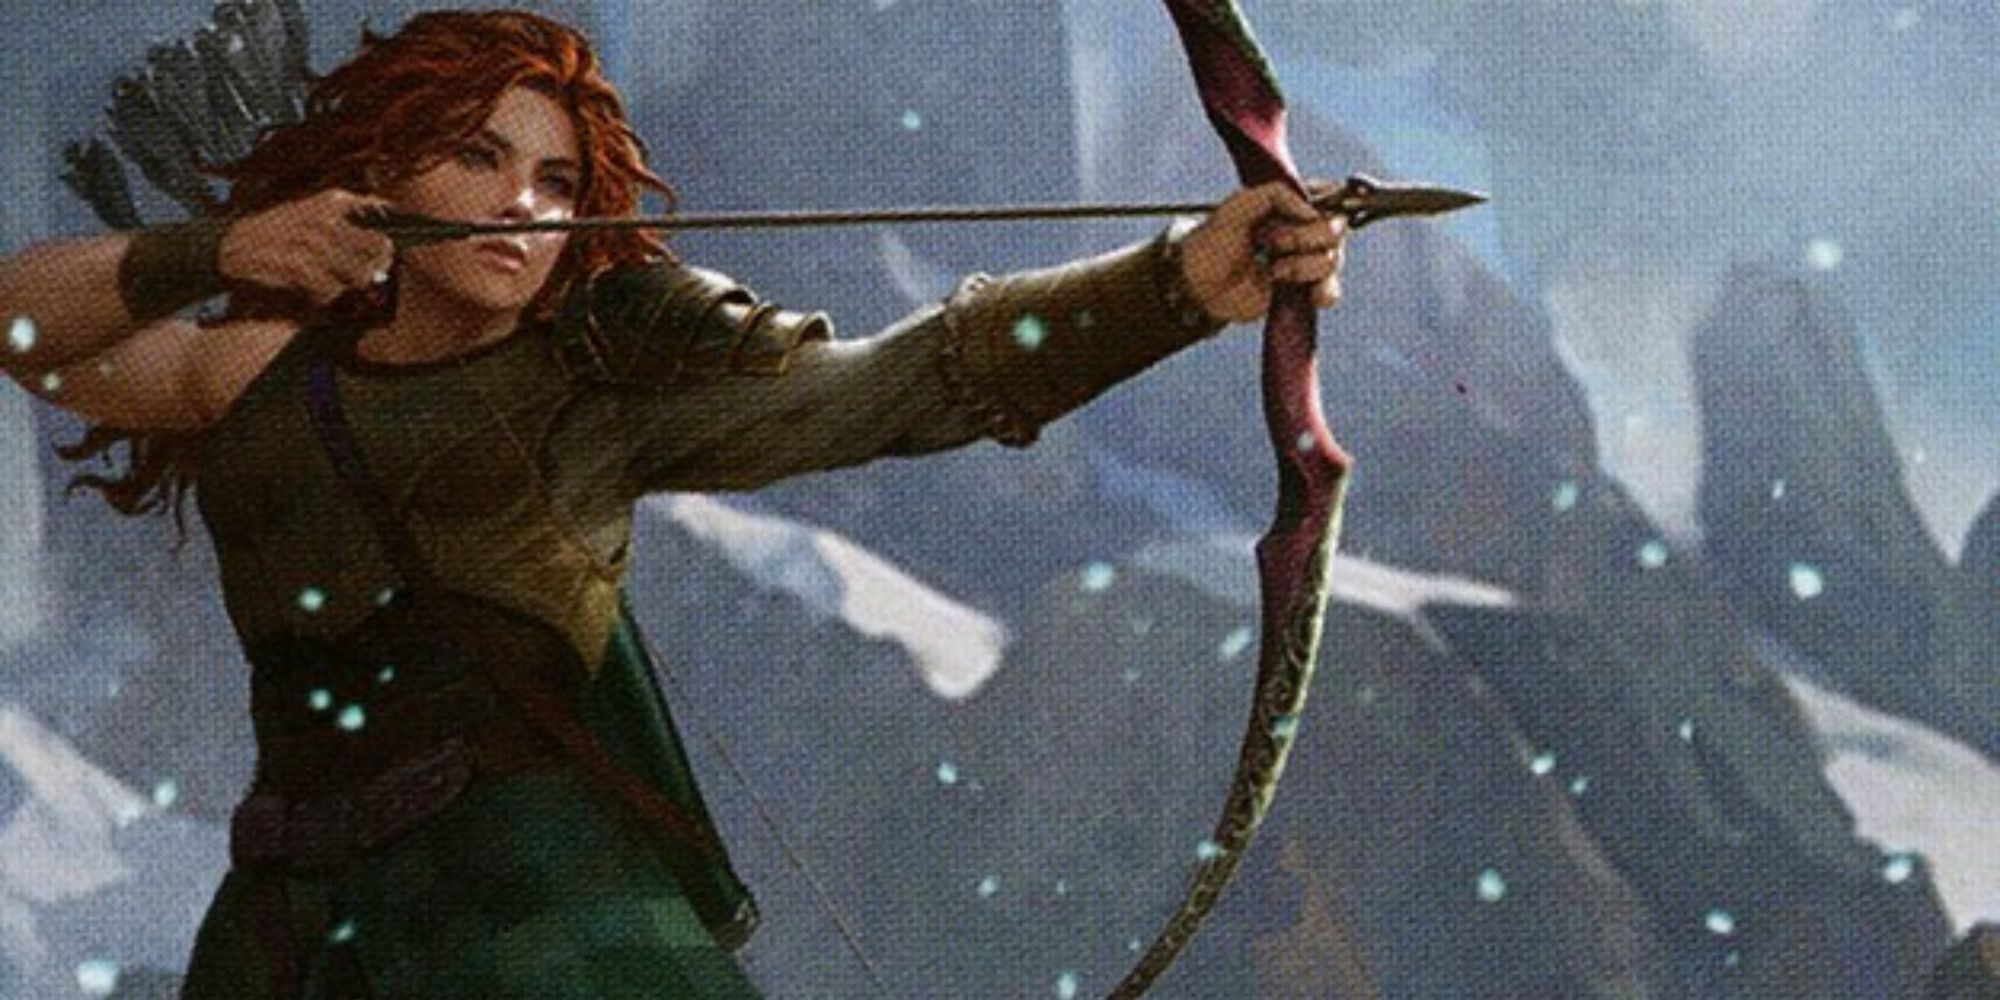 A red headed archer preparing to shoot a bow on a snowy mountain